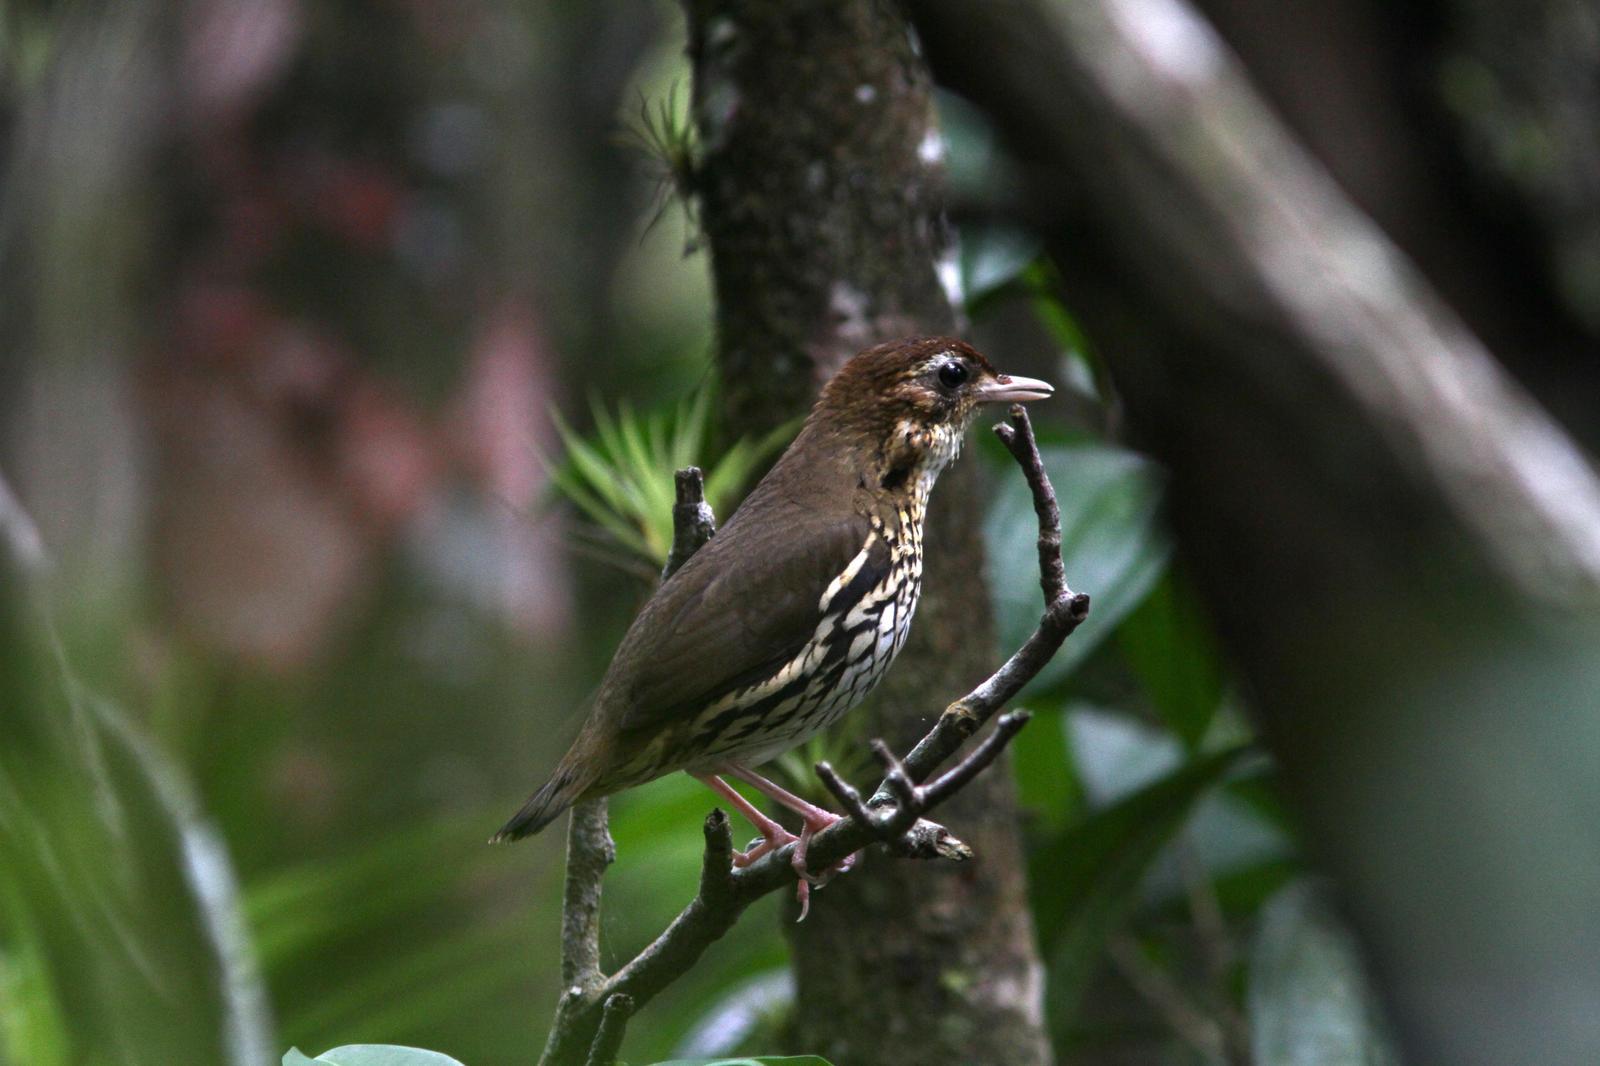 Short-tailed Antthrush Photo by Marcelo Padua